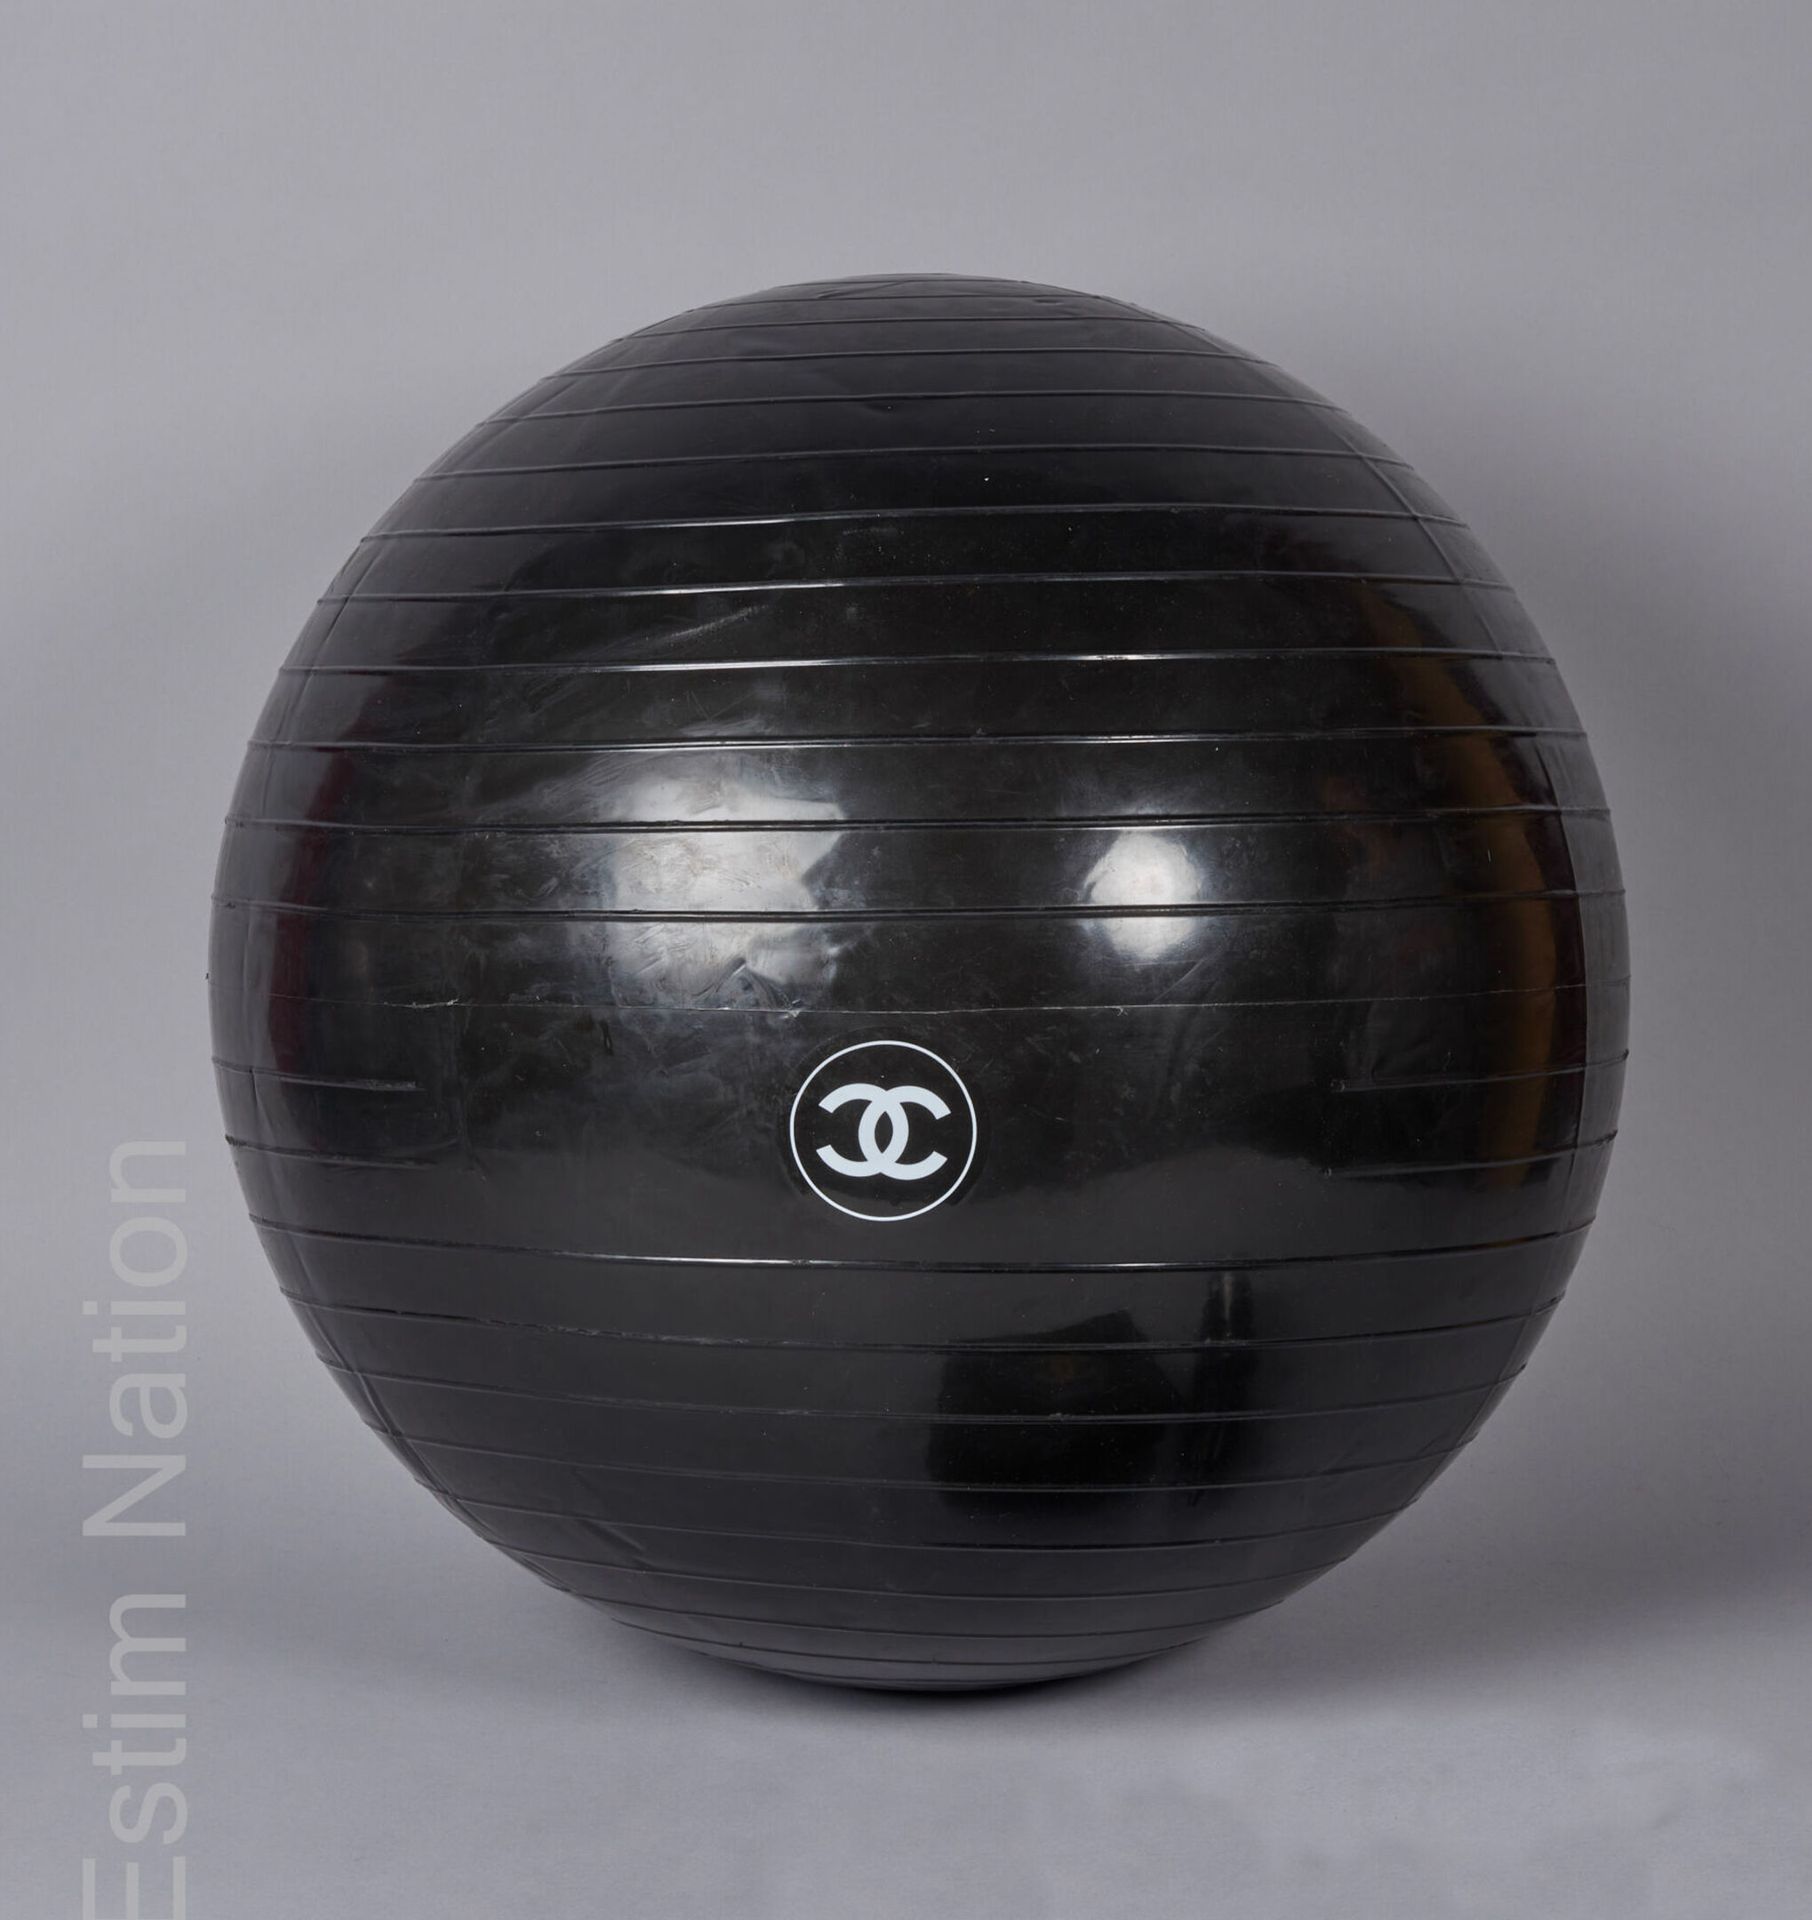 CHANEL (2017) YOGA BALL in black composite and its pump (signed) (diam: 47 cm)